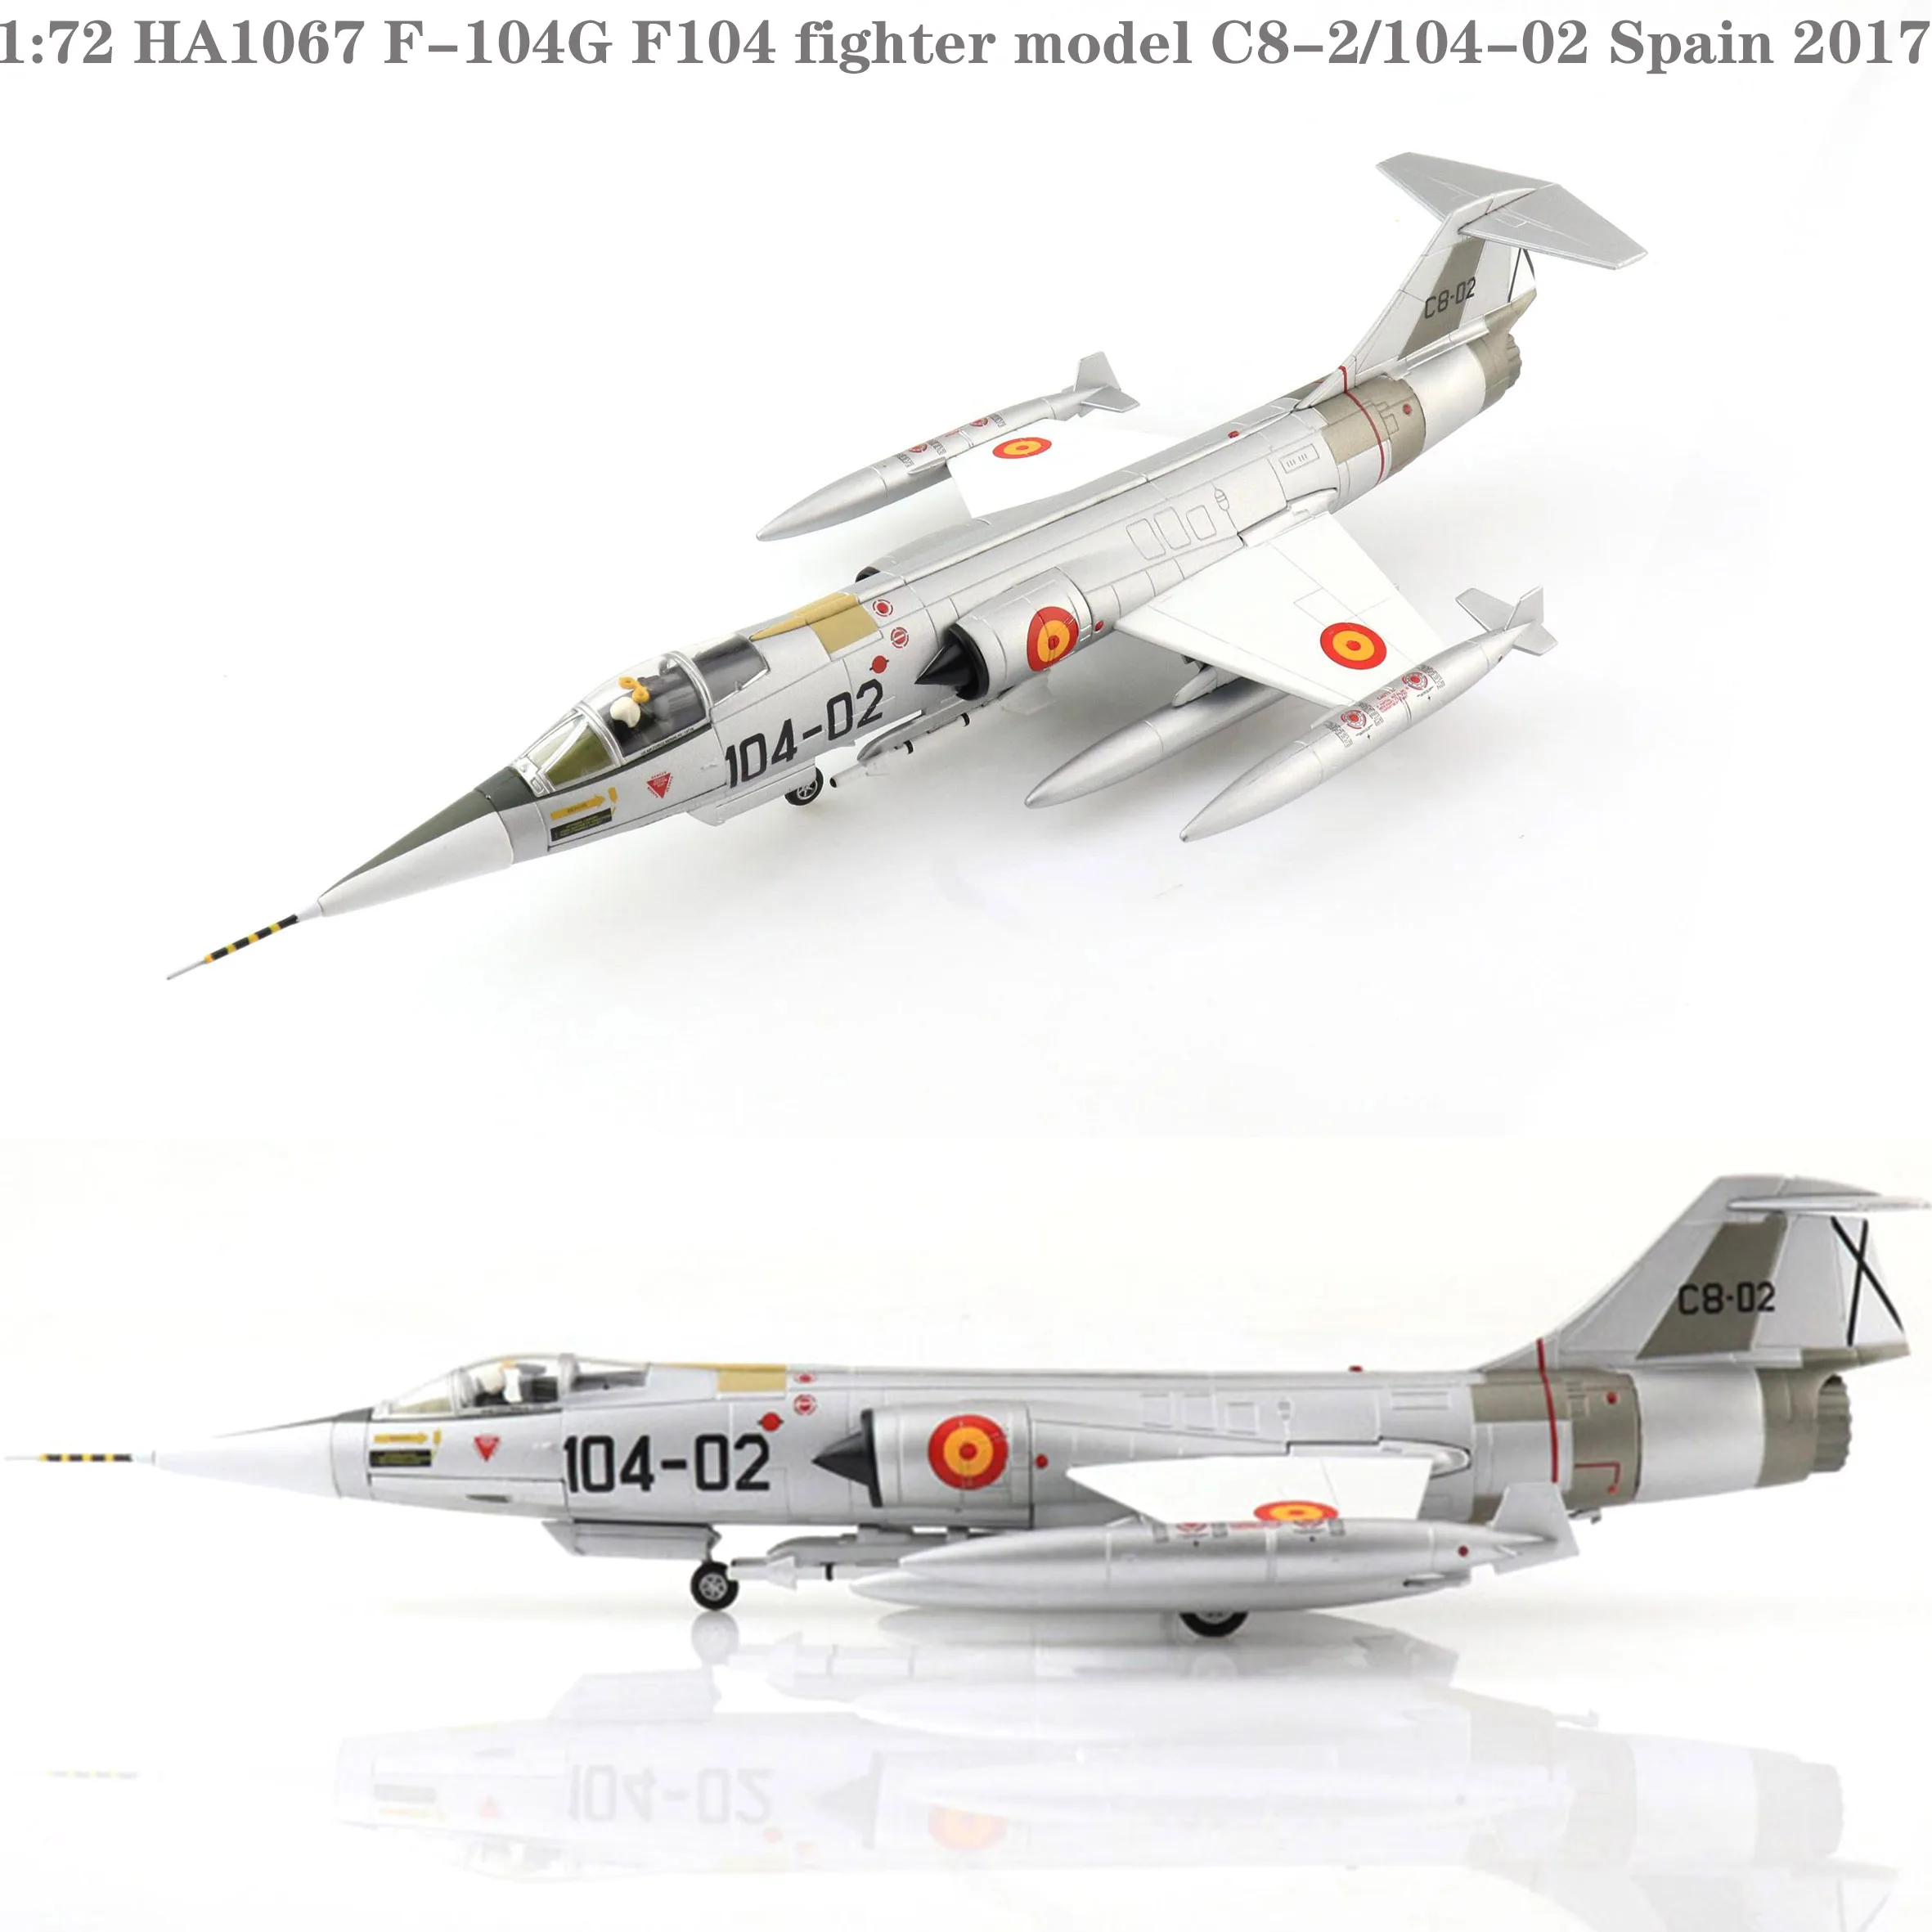 

Fine 1:72 HA1067 F-104G F104 fighter model C8-2/104-02 Spain 2017 Finished alloy collection model